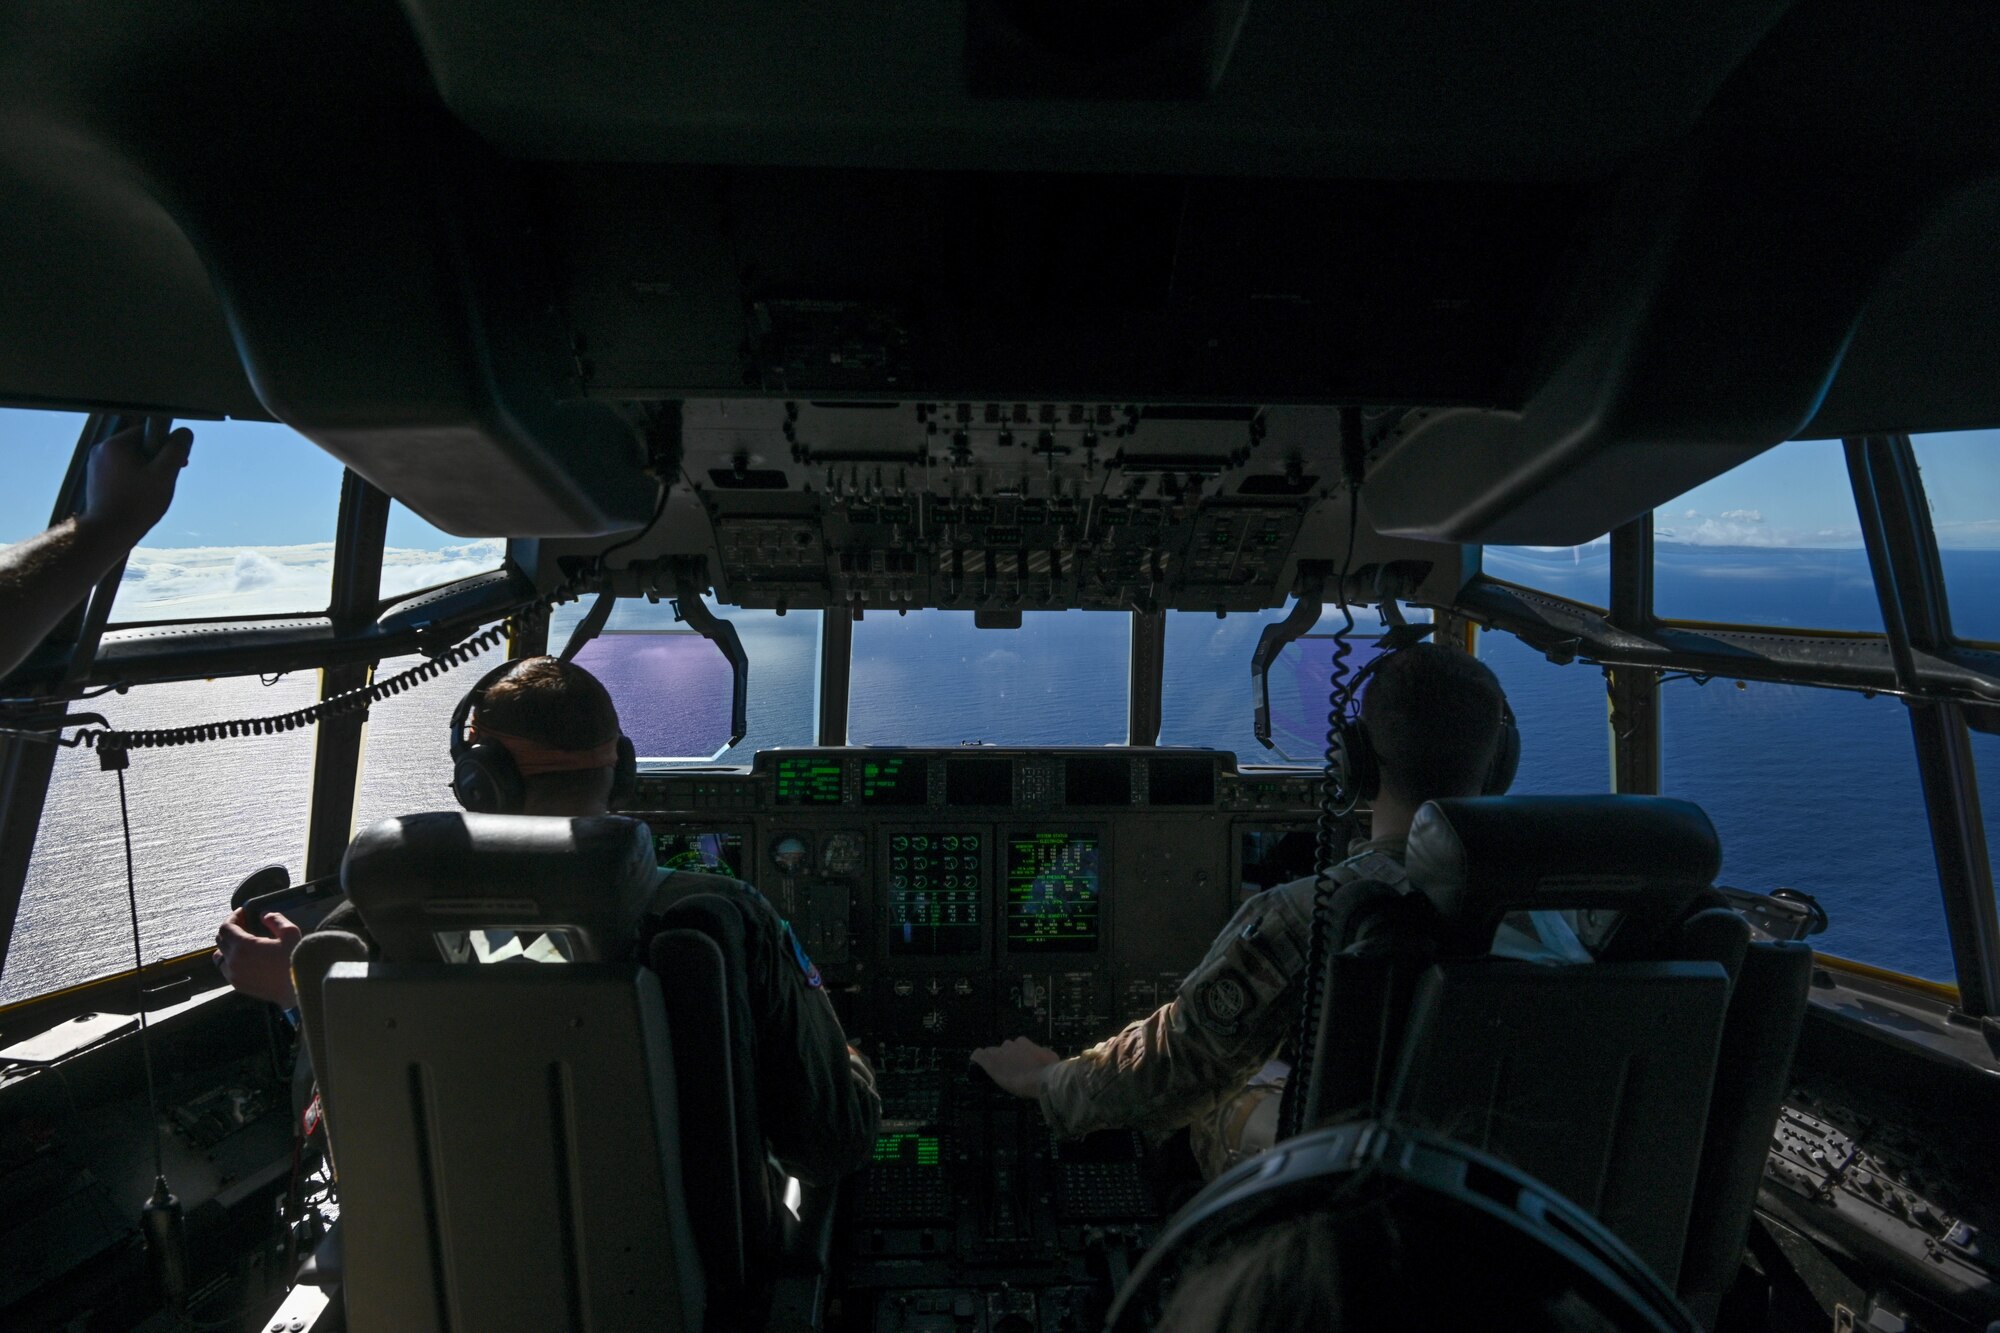 Two U.S. Air Force pilots sit in the cockpit and pilot a C-130J aircraft over open water.